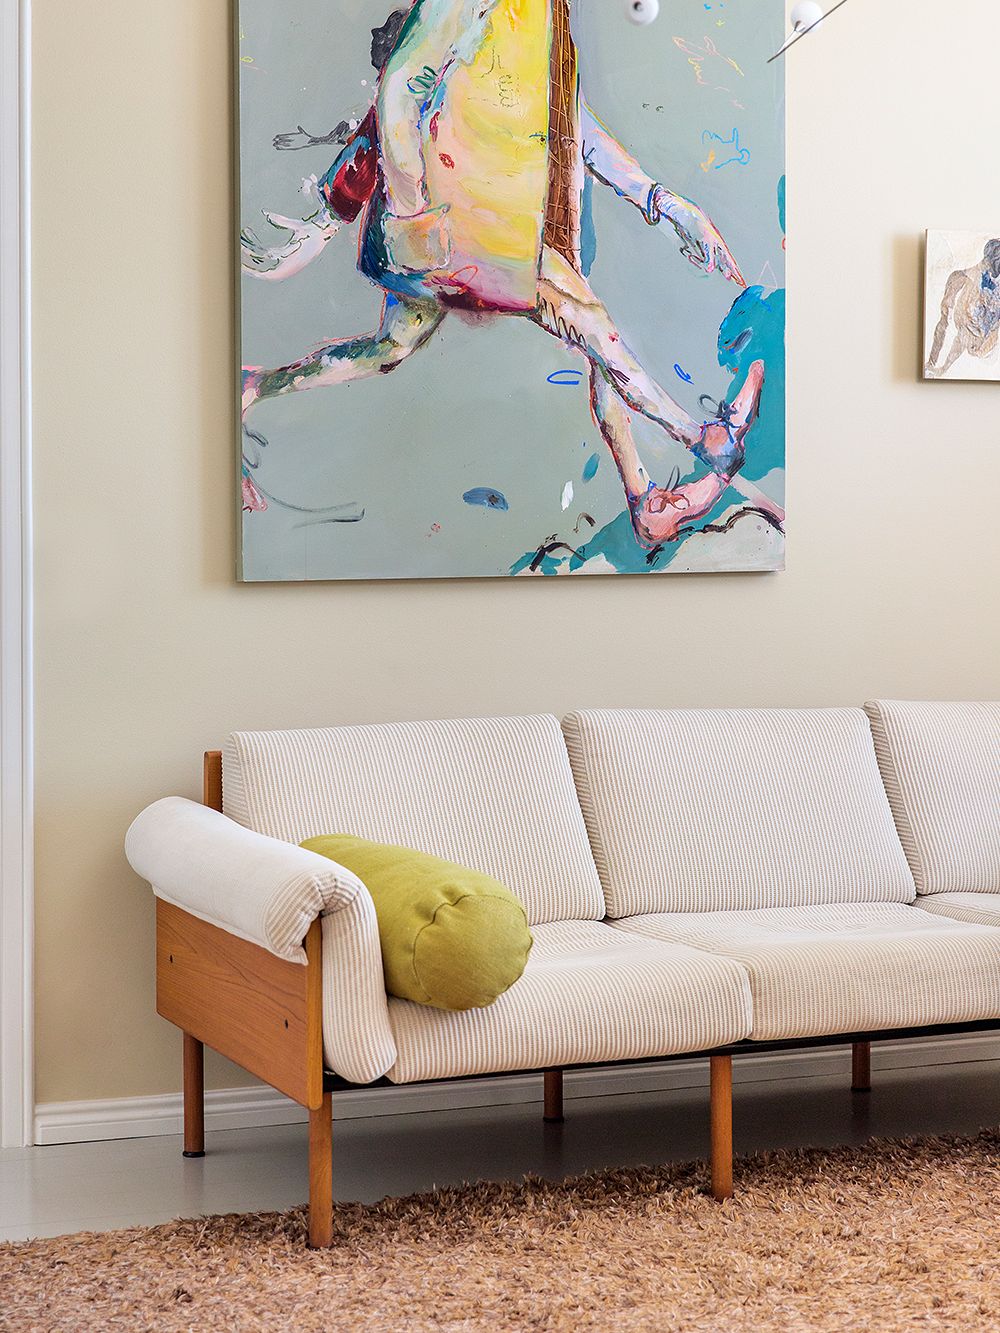 An image of the Ateljee sofa designed by Yrjö Kukkapuro, accompanied by a large painting on the wall.